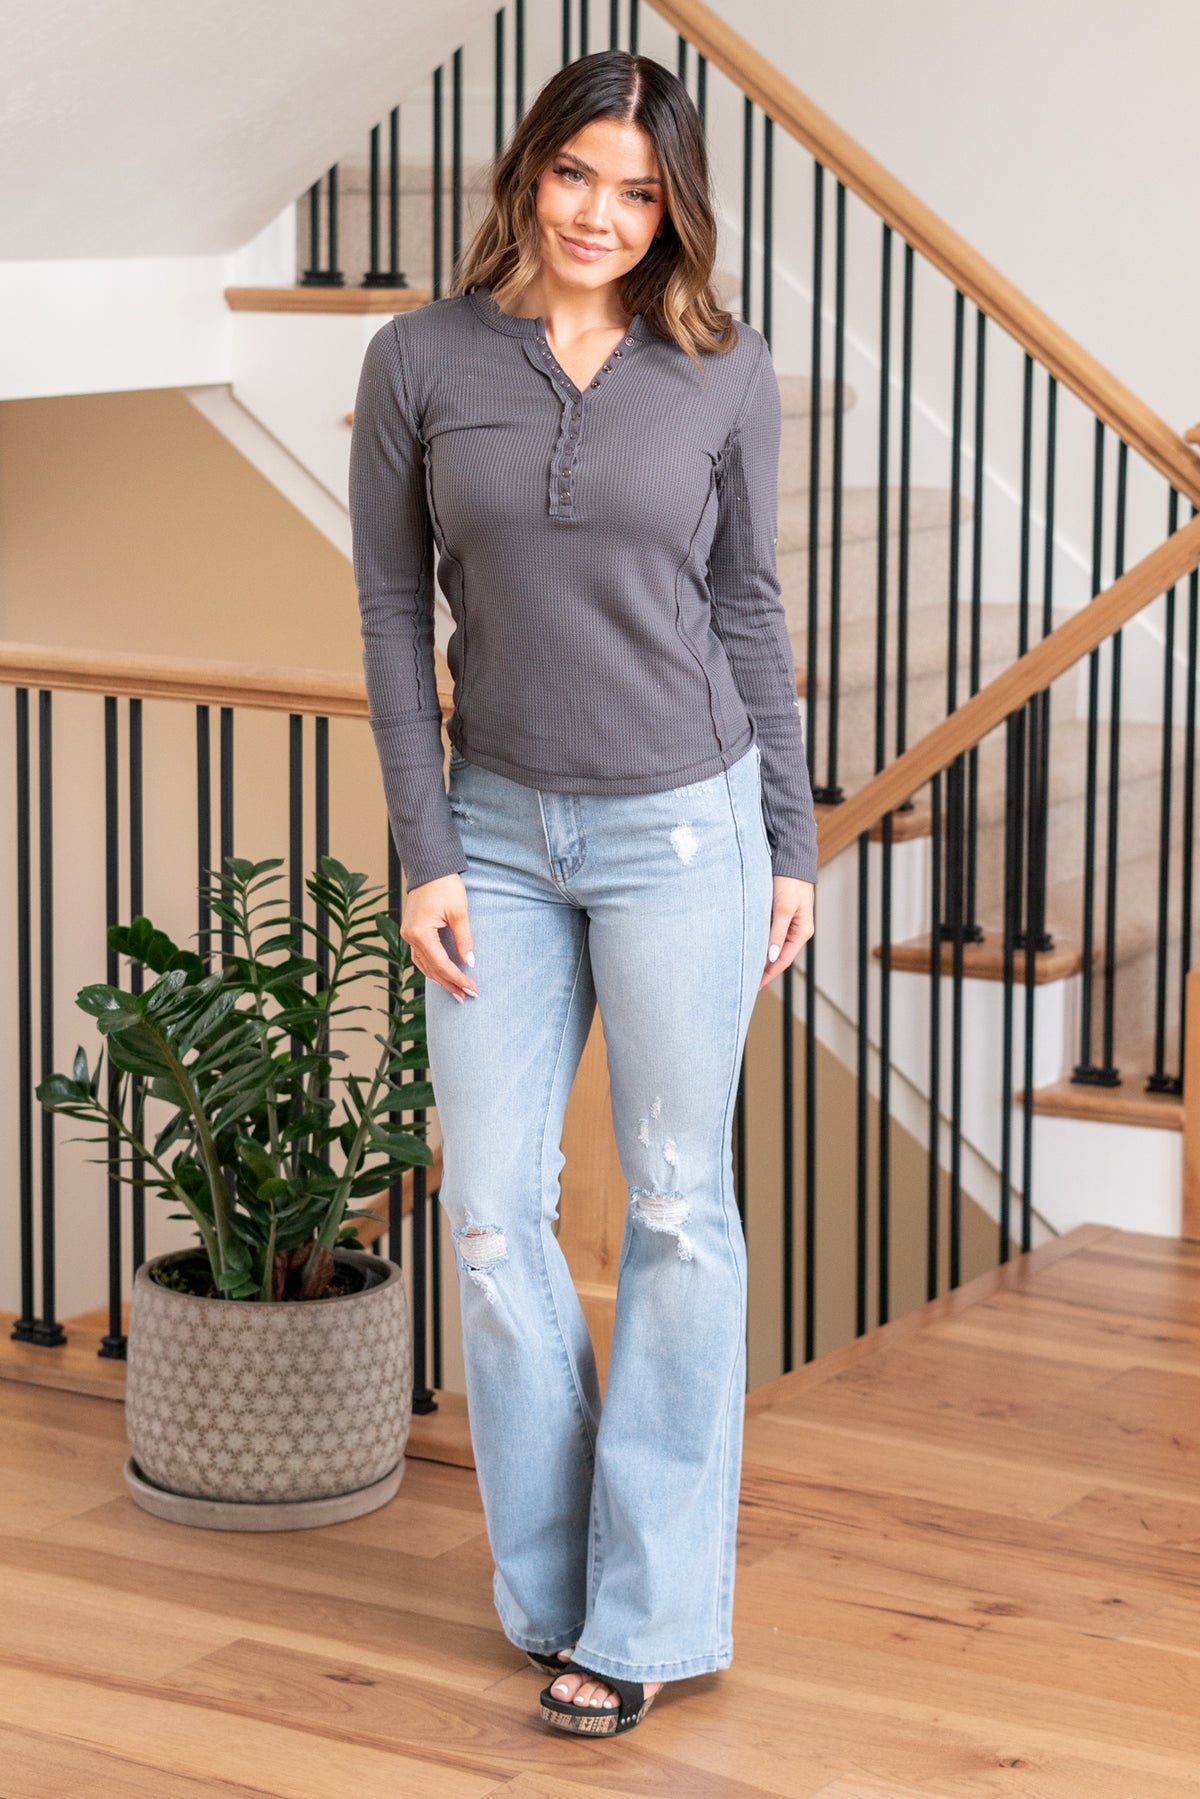 Hem & Thread   Stay both cozy and stylish with the Beth Thermal Snap Button Down Fitted Henley Top. Crafted for a snug fit, this top features a classic button-down style and thermal fabric that's perfect for cooler days.  Color: Charcoal Neckline: Open  Material: 30% Spandex 28% Acrylic 23% Nylon 19% Viscose Style #: 32676F-Charcoal